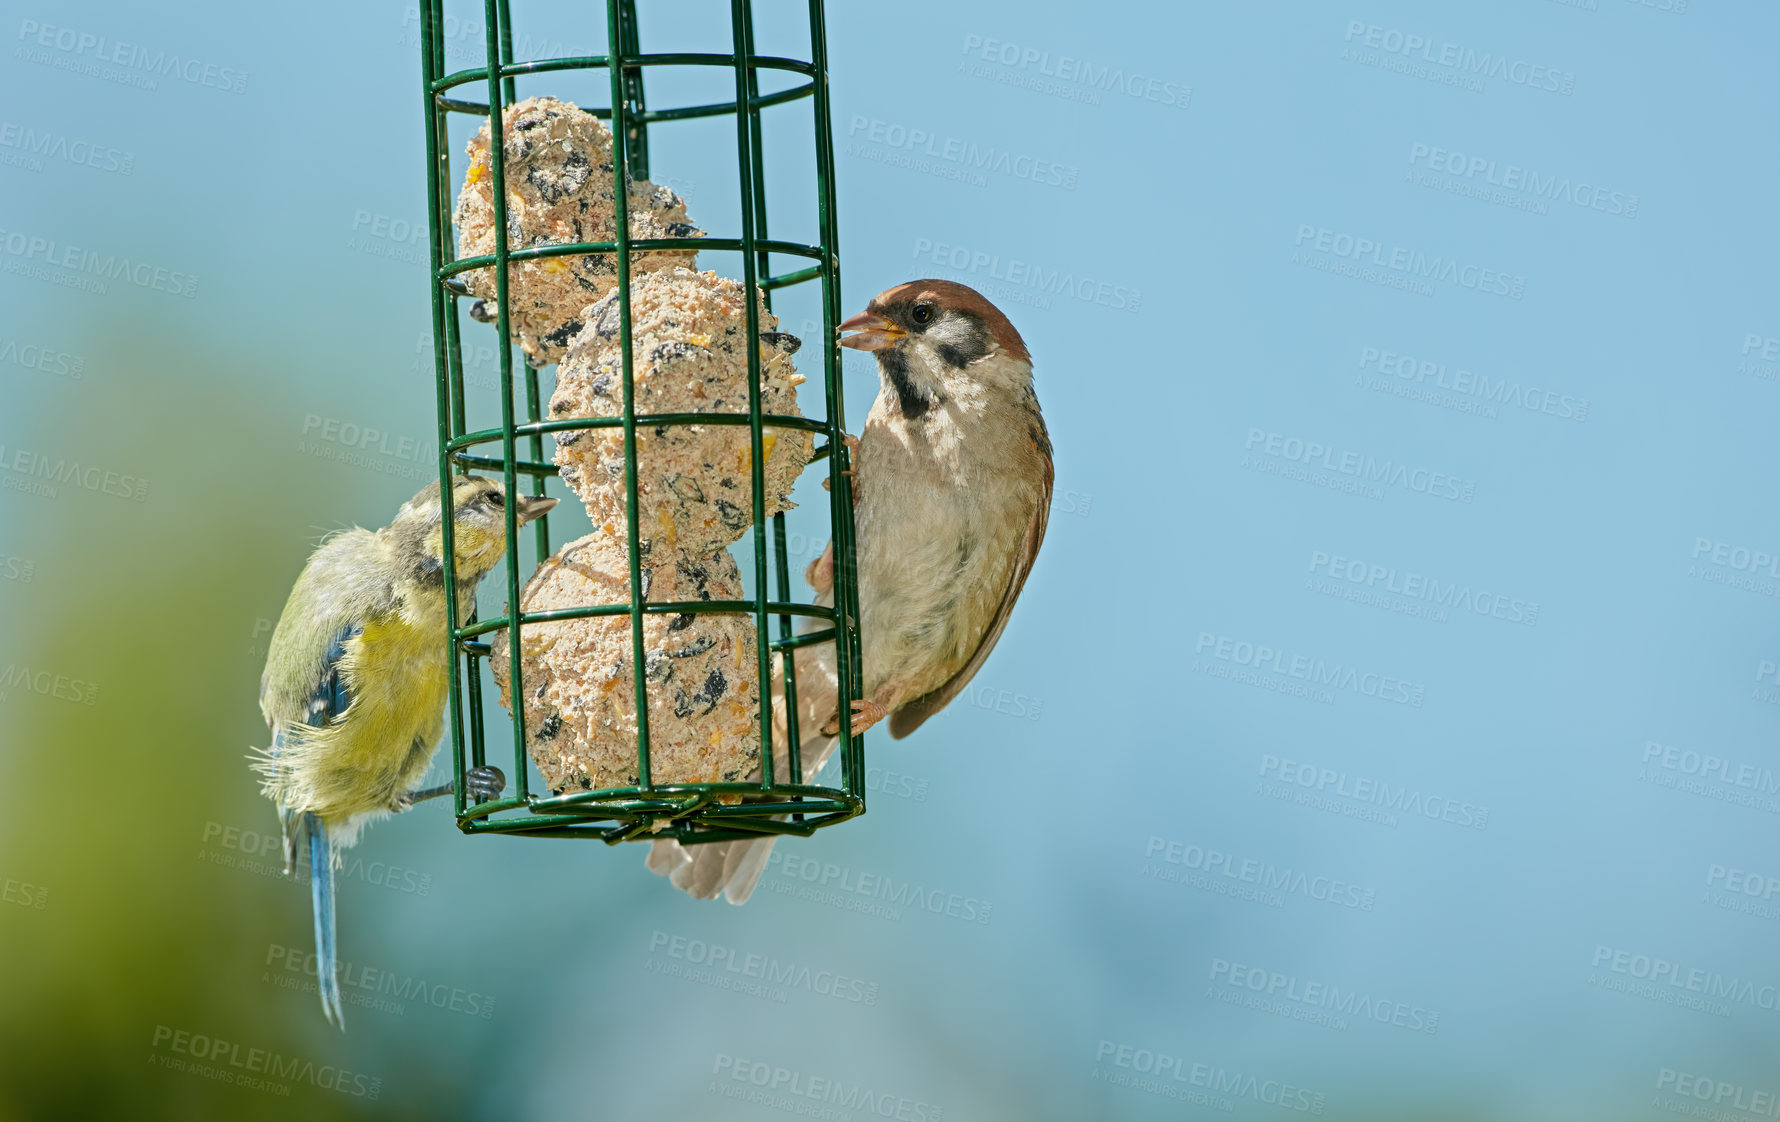 Buy stock photo Sparrows are a family of small passerine birds, Passeridae. They are also known as true sparrows, or Old World sparrows, names also used for a particular genus of the family, Passer